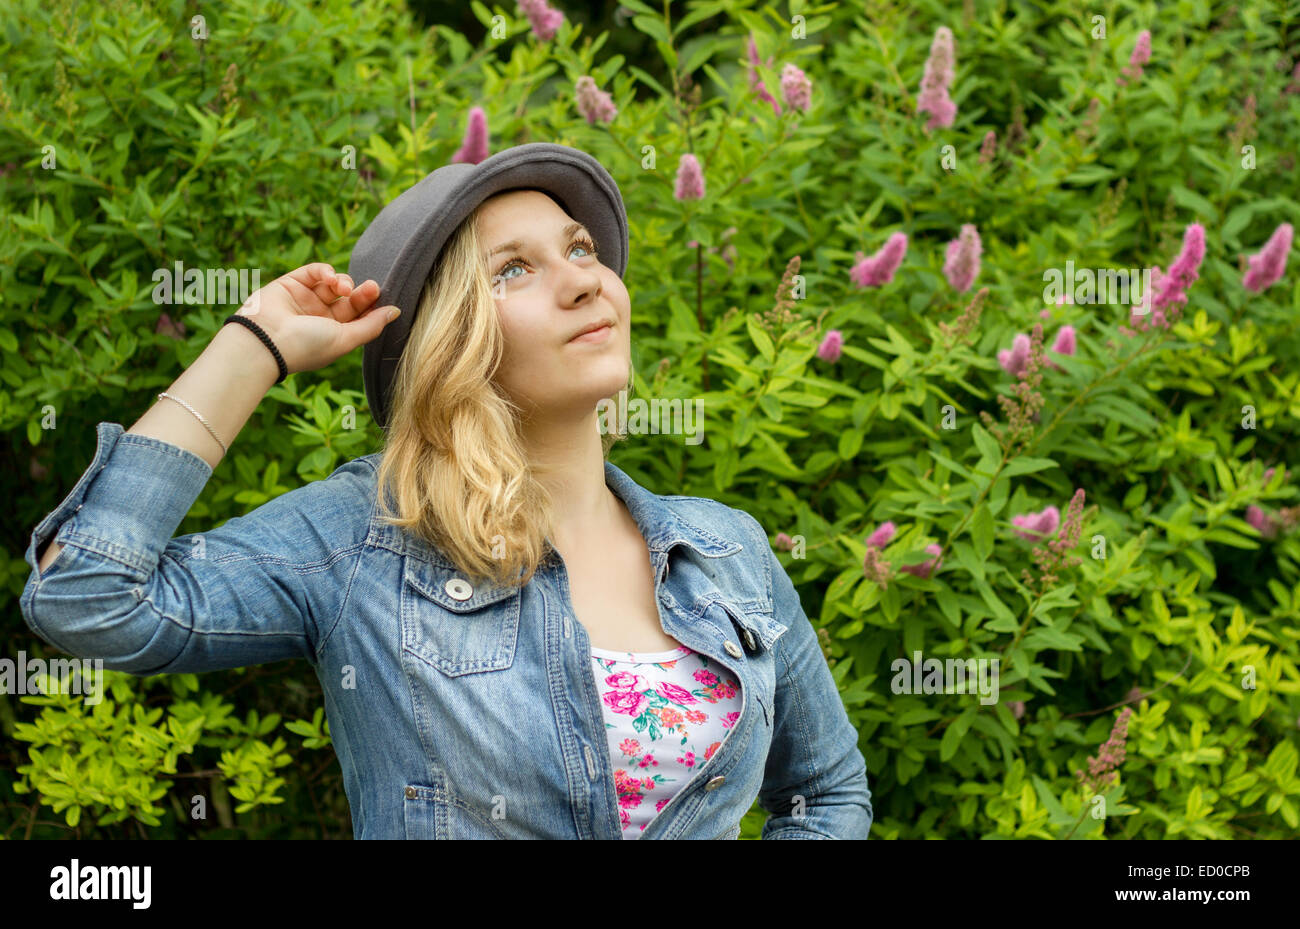 Girl (14-15) smiling and looking up Stock Photo